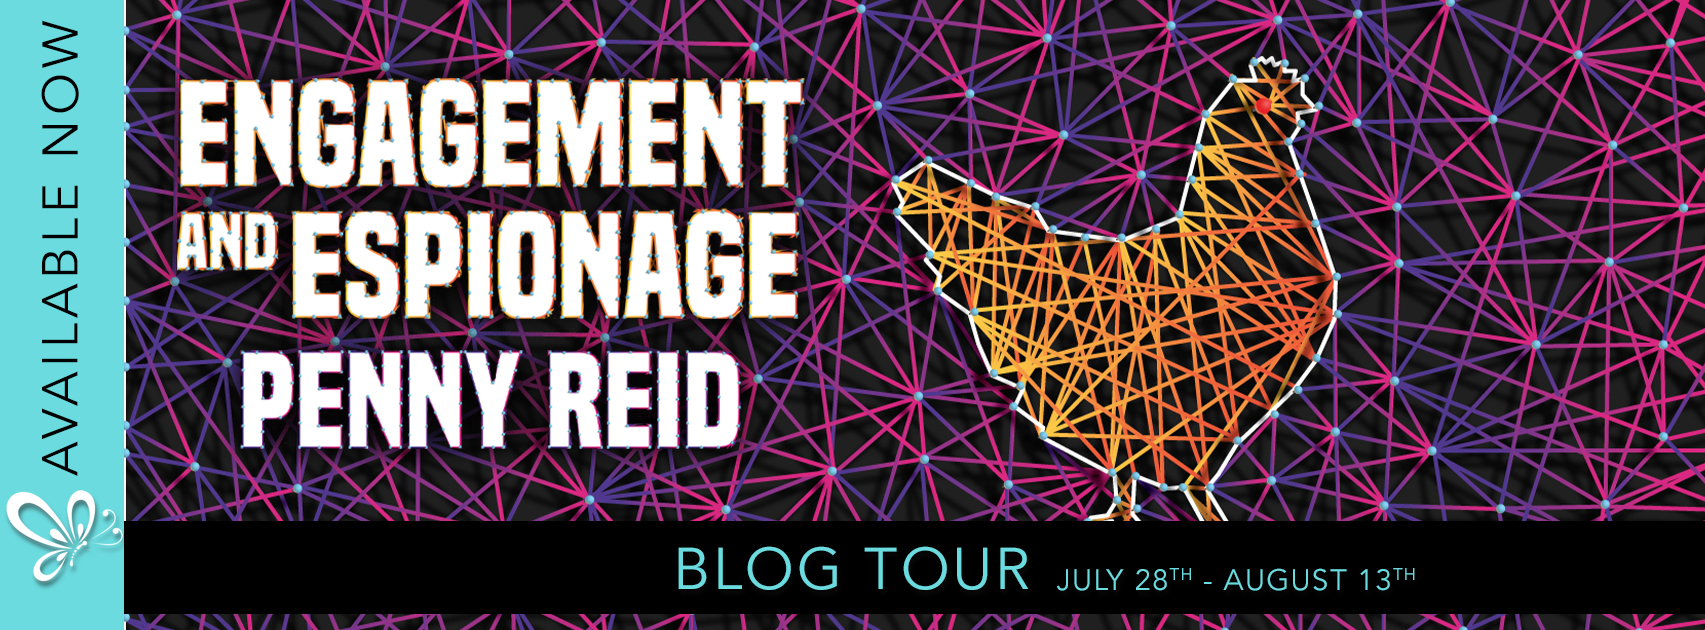 ✶Blog Tour✶ Review: Engagement and Espionage by Penny Reid